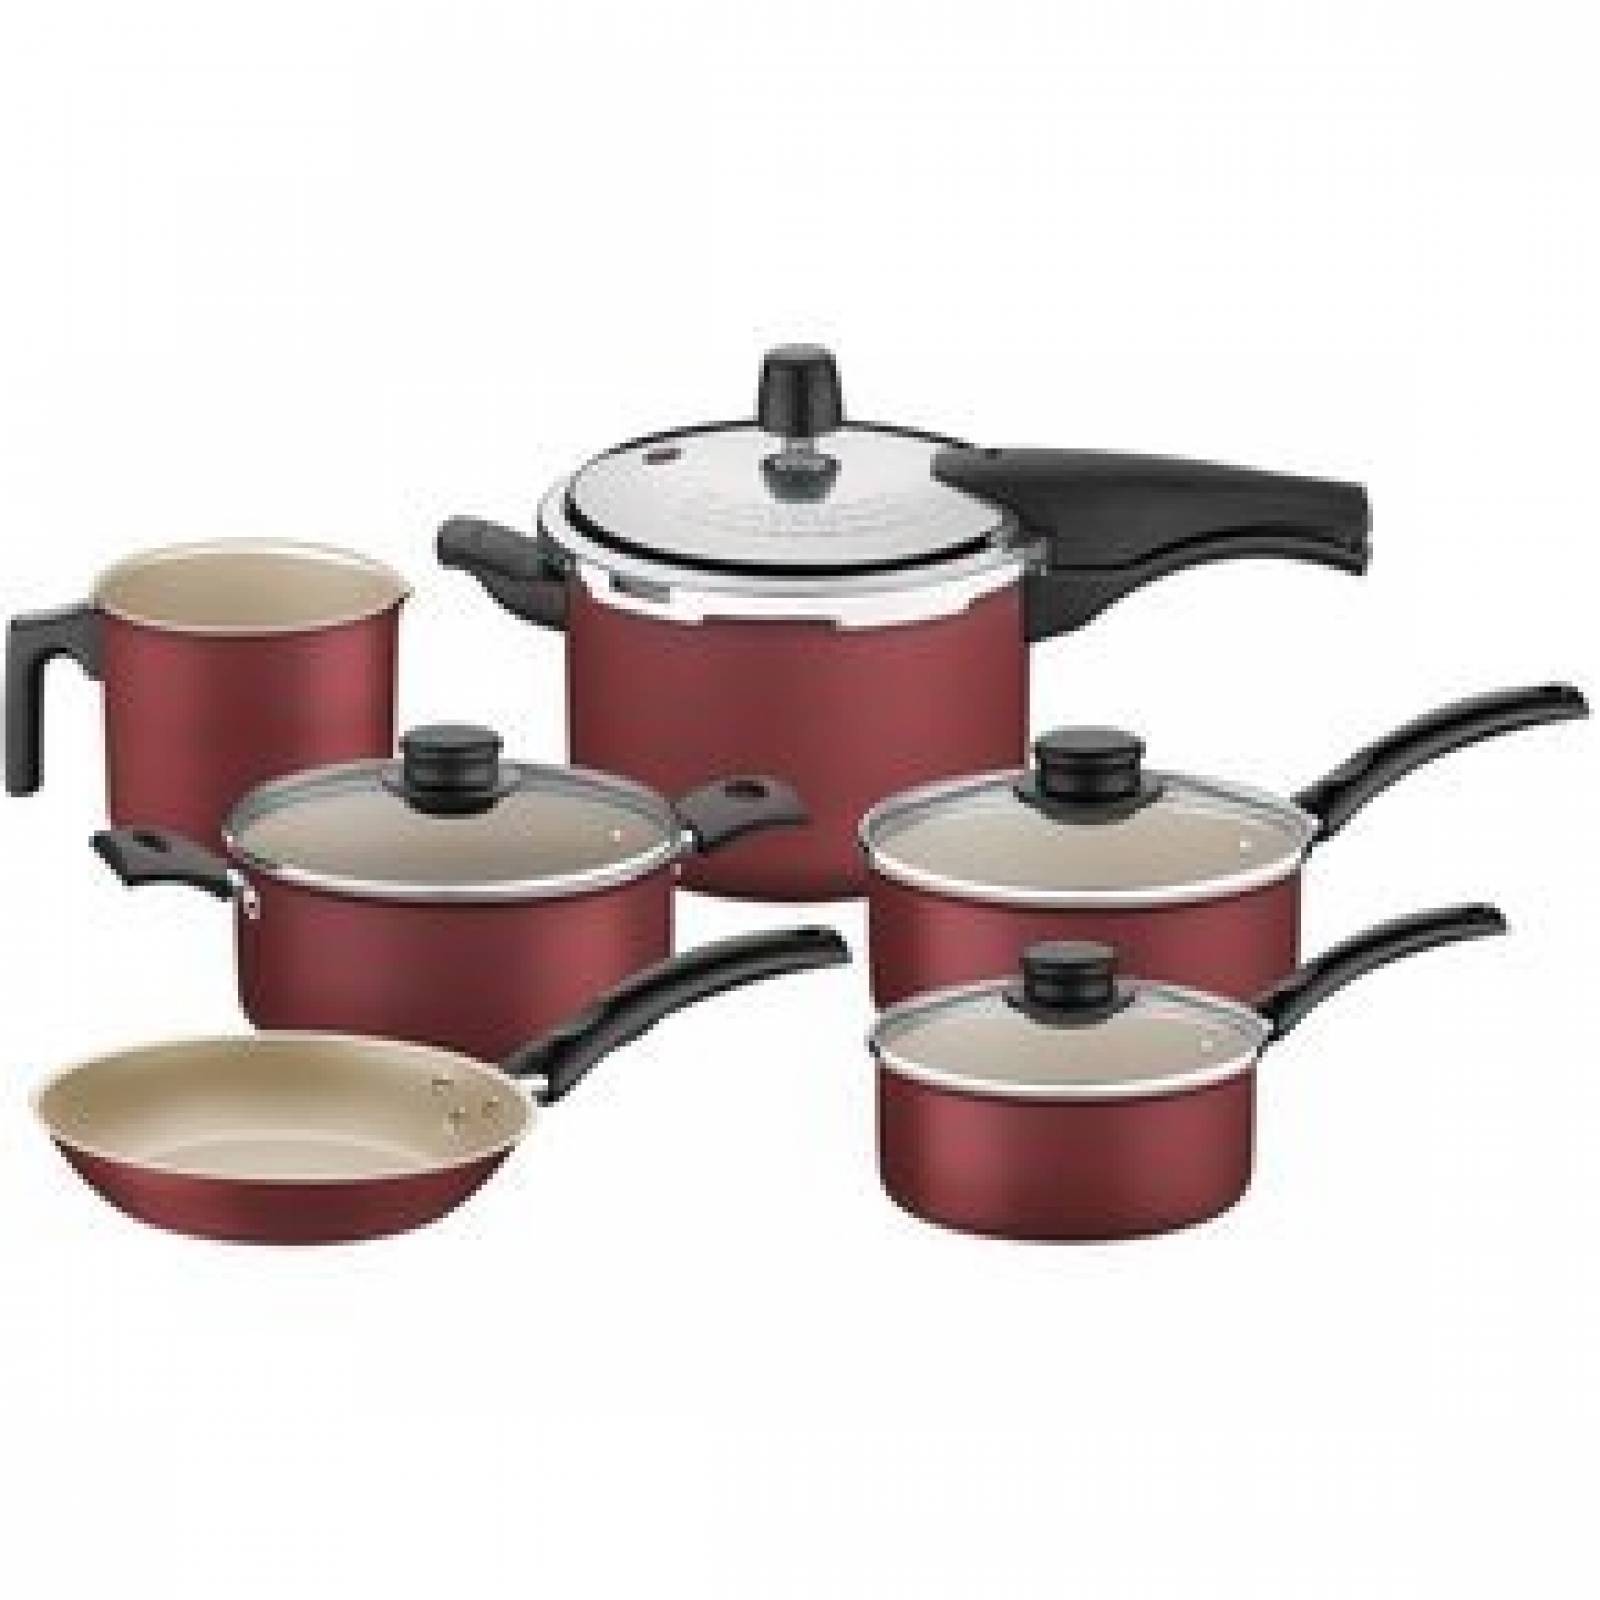 T-fal B036SE Excite ProGlide Nonstick Thermo-Spot Heat Indicator Dishwasher  Oven Safe Cookware Set, 14-Piece, Bronze